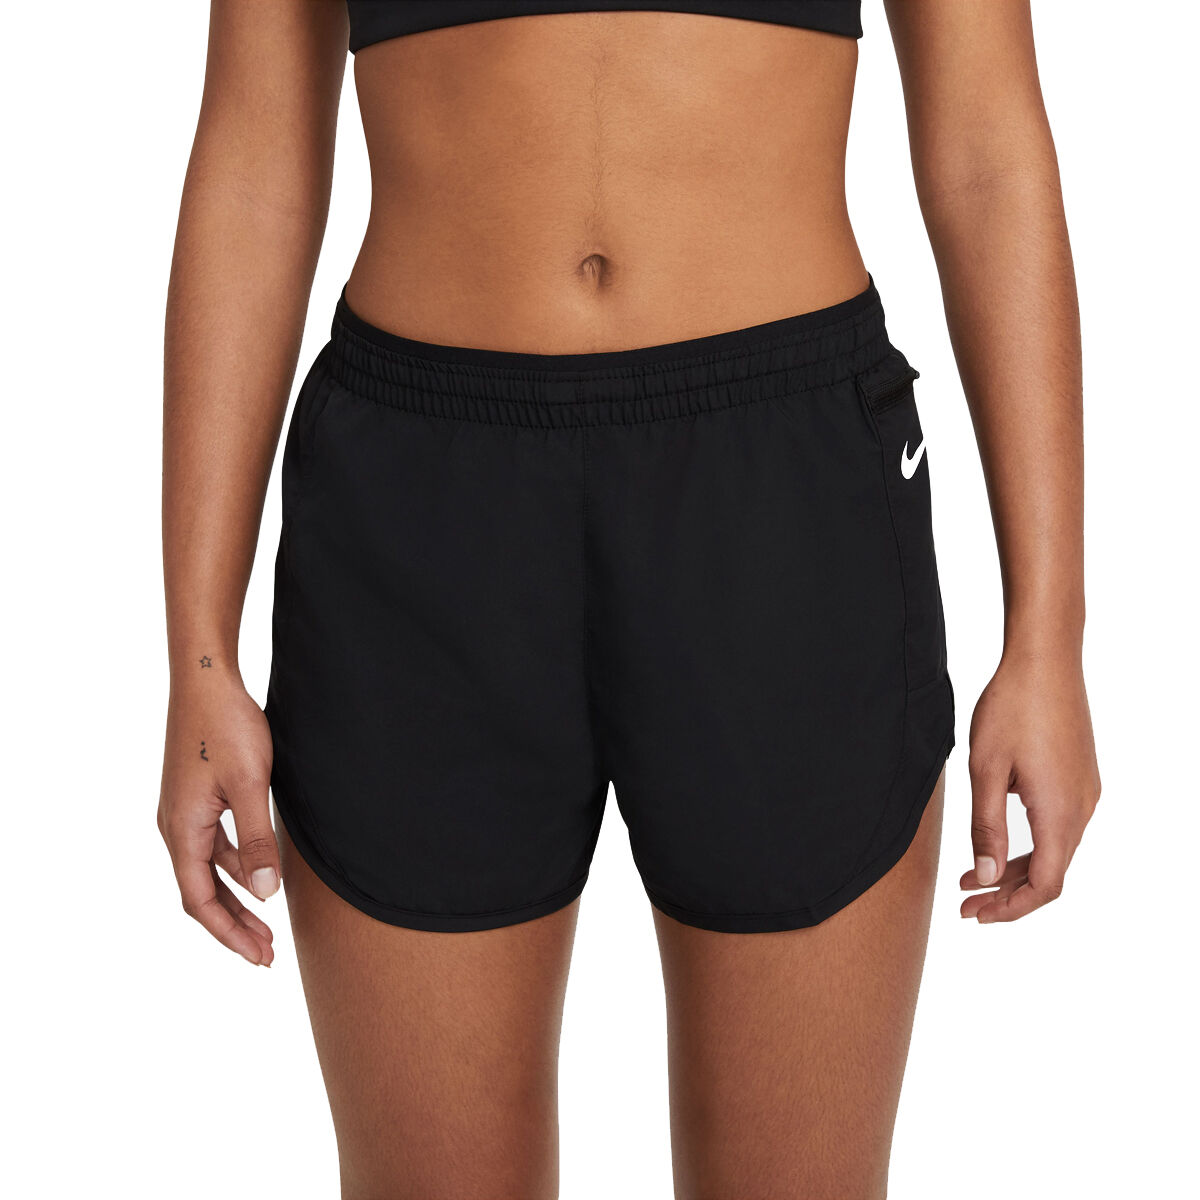 Reebok United By Fitness Women's Chase Bootie Shorts